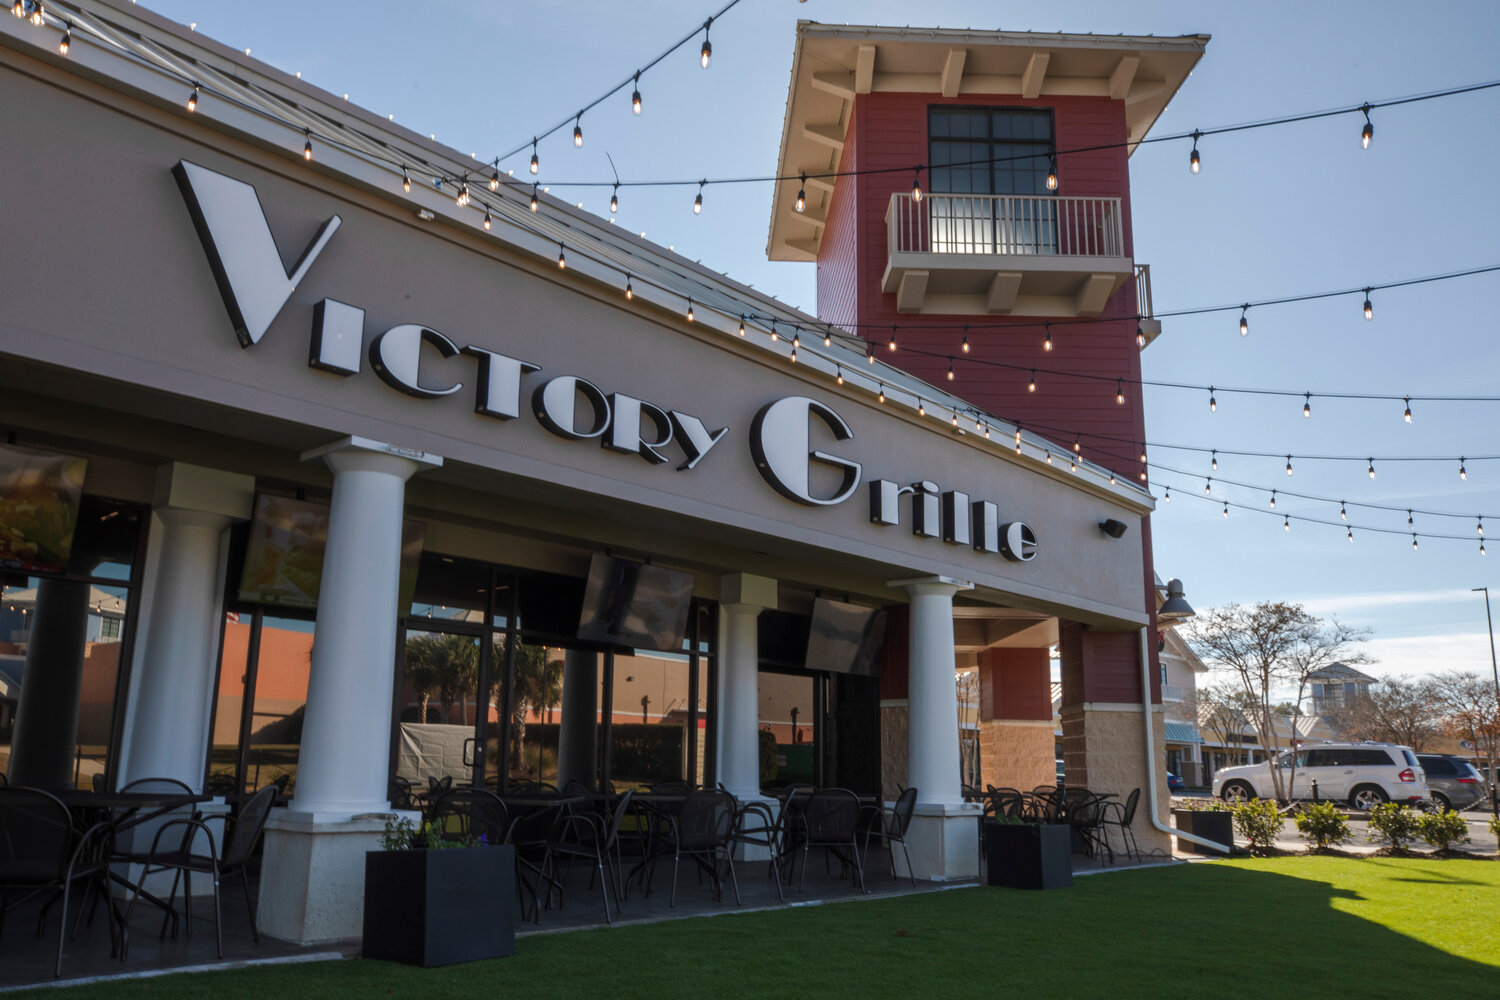 Baumhower’s Victory Grille offers diners outdoor eating areas as well as a grass lawn for cornhole.